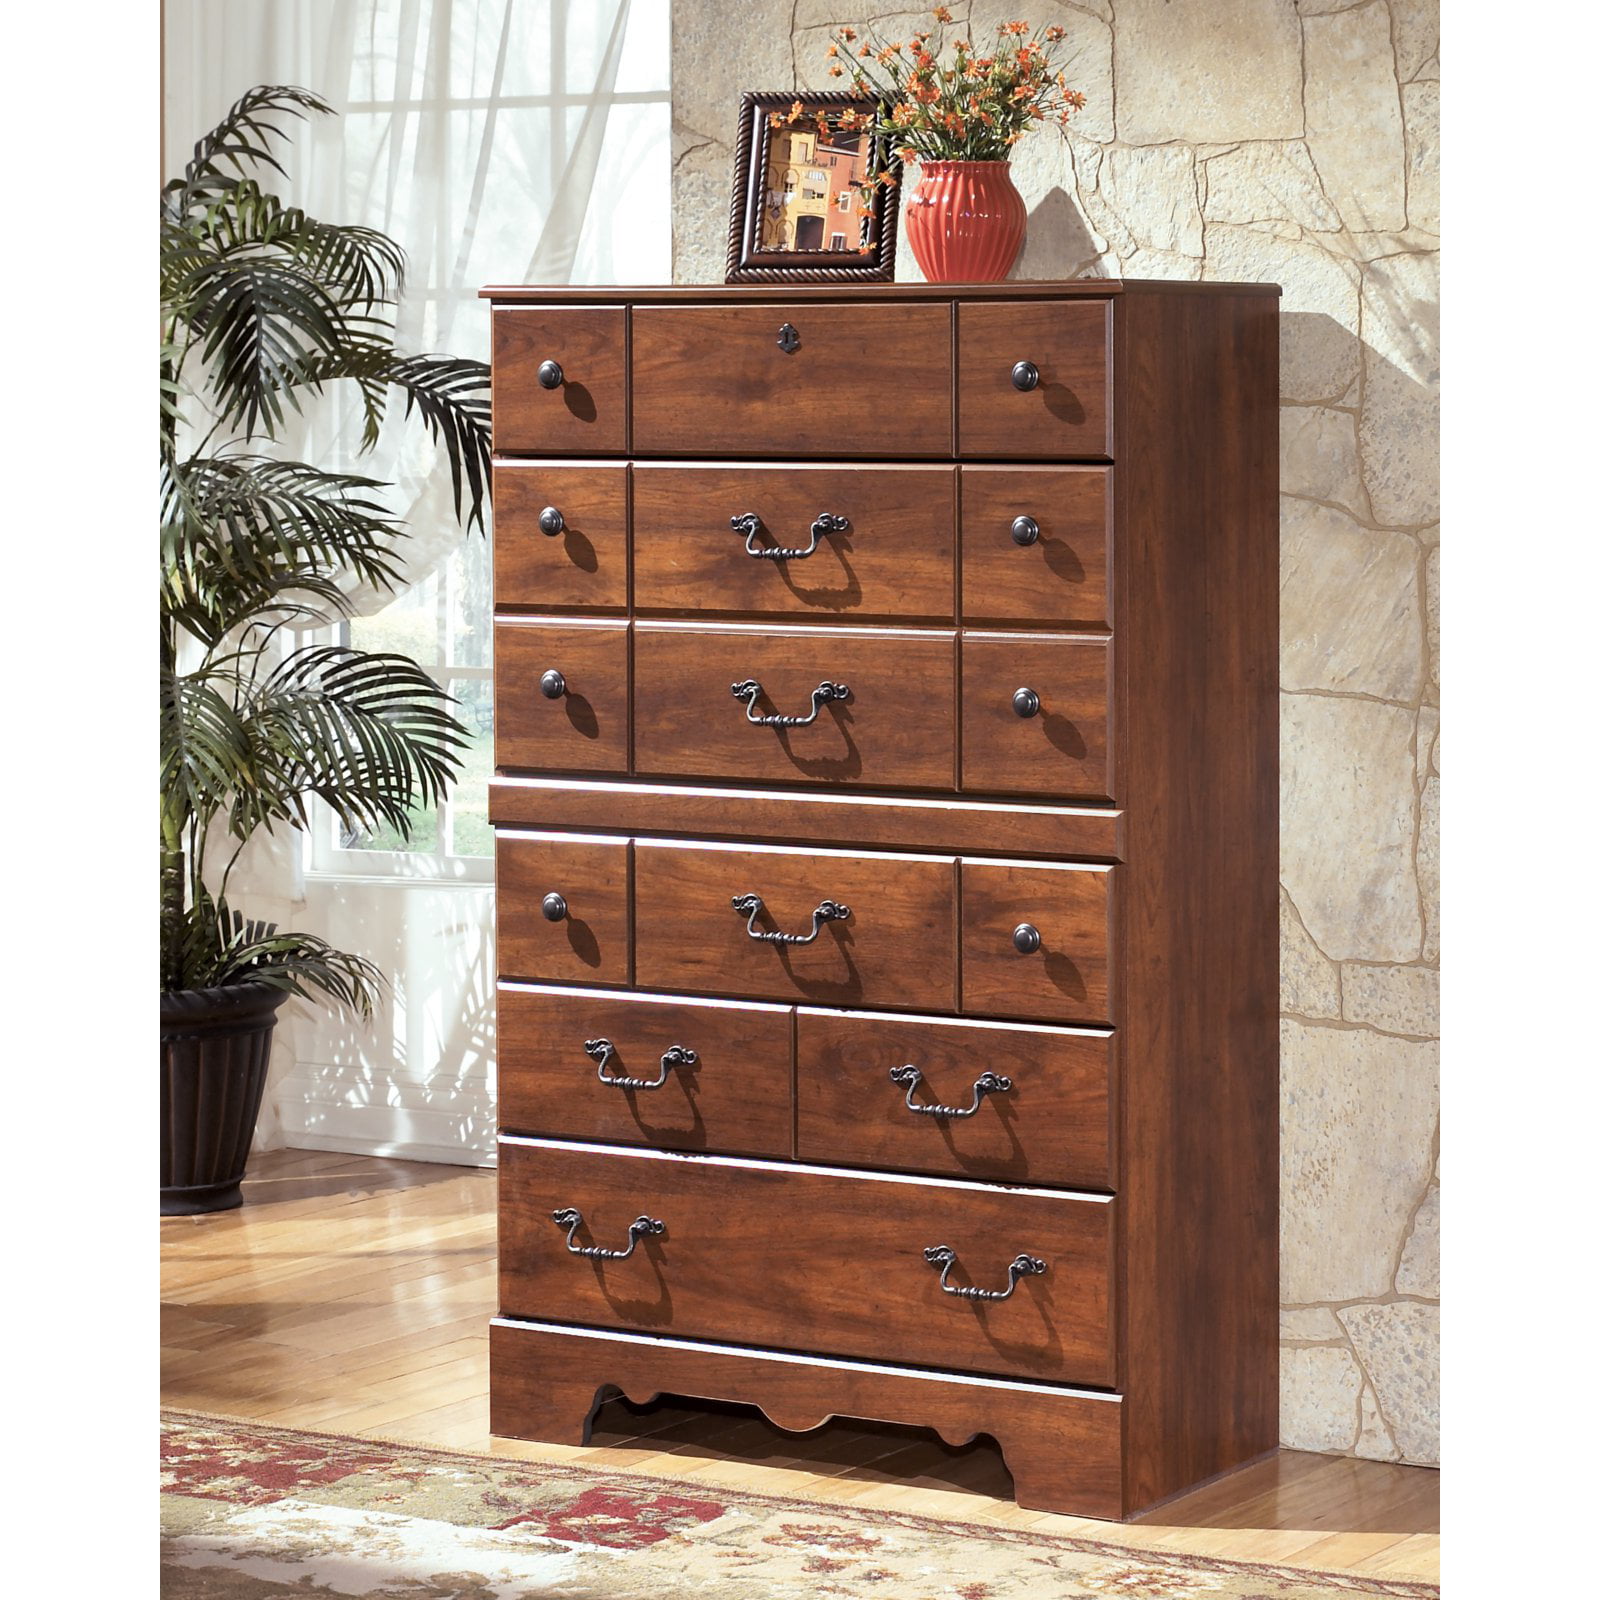 Signature Design by Ashley Timberline 5 Drawer Chest